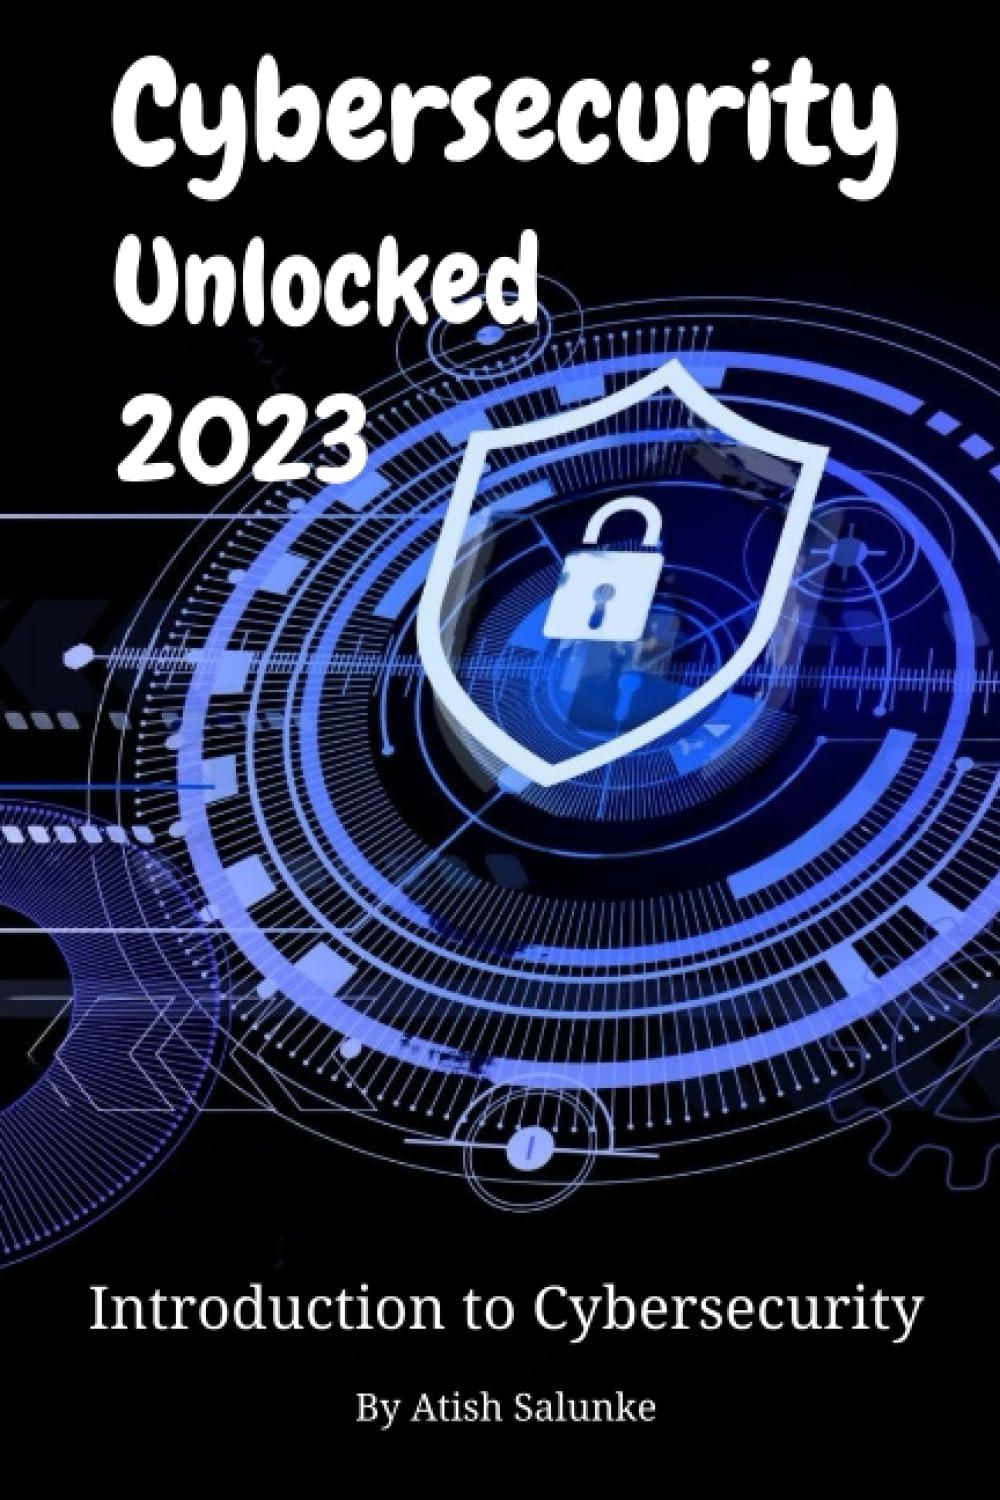 cybersecurity unlocked 2023 introduction to cybersecurity 1st edition atish salunke b0c7t5tyzq, 979-8398187342